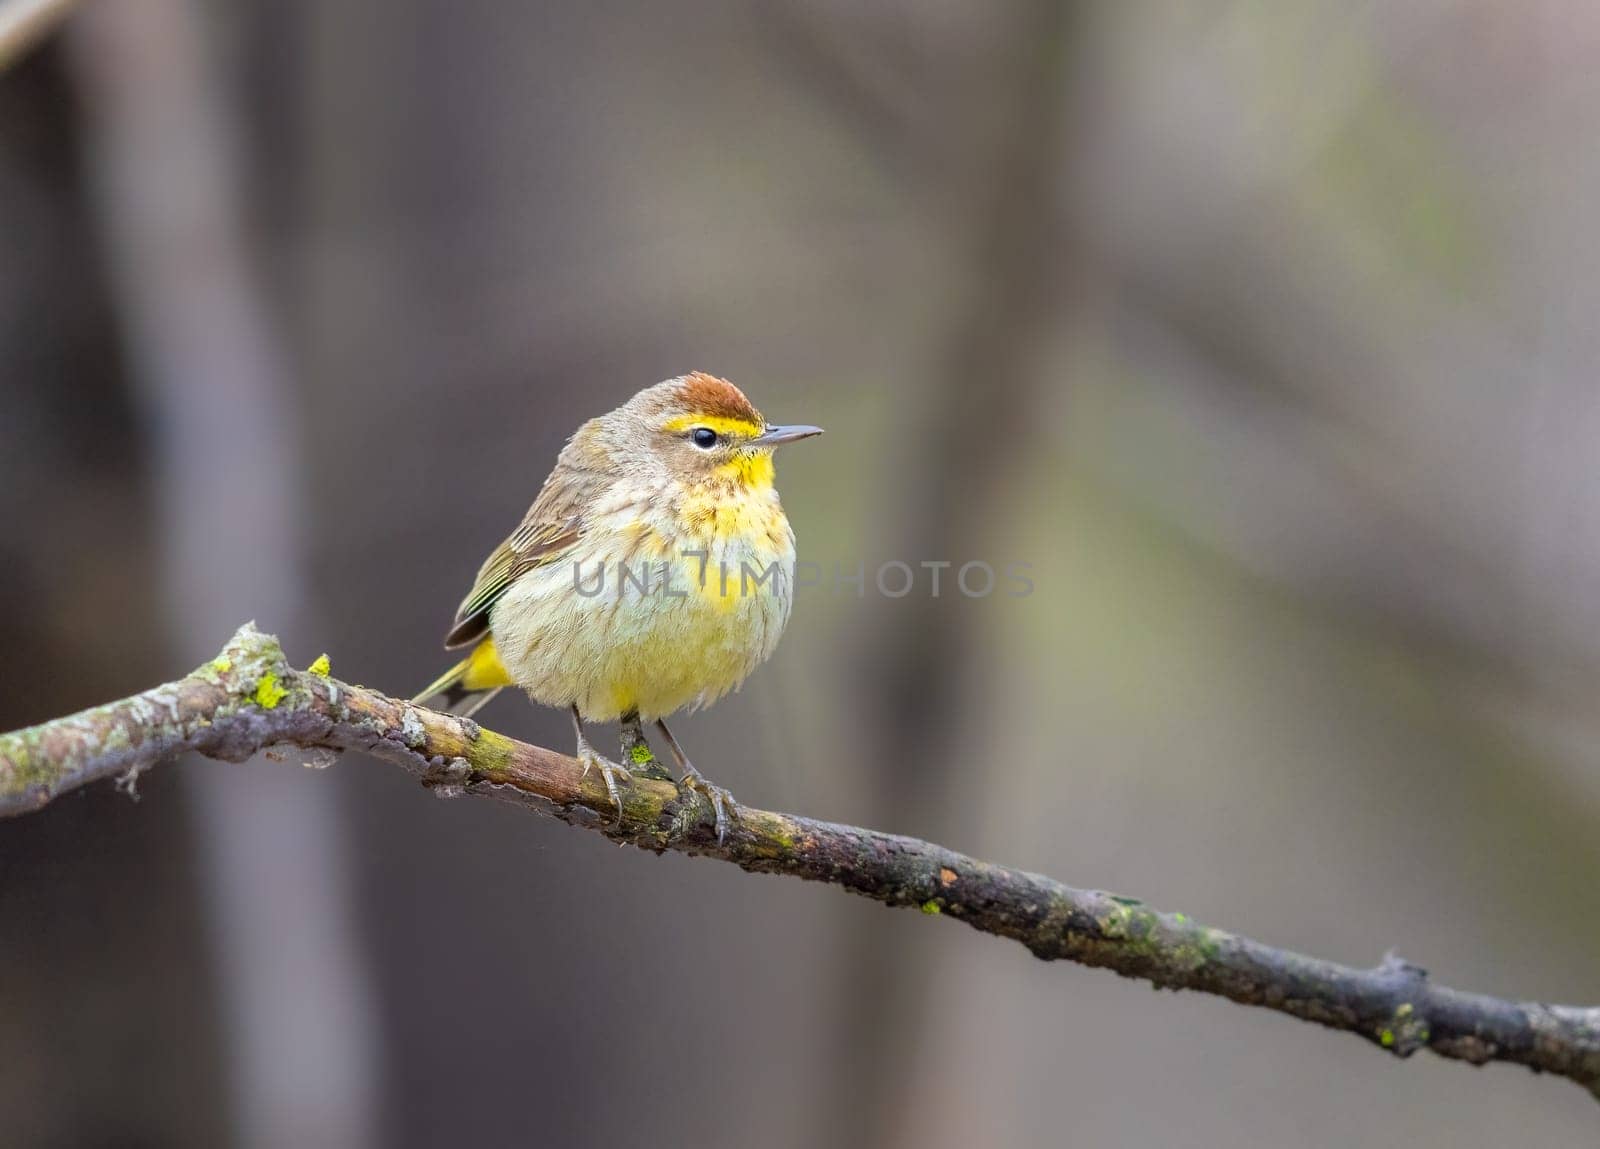 A Plam Warbler perched on a tree branch by Rajh_Photography